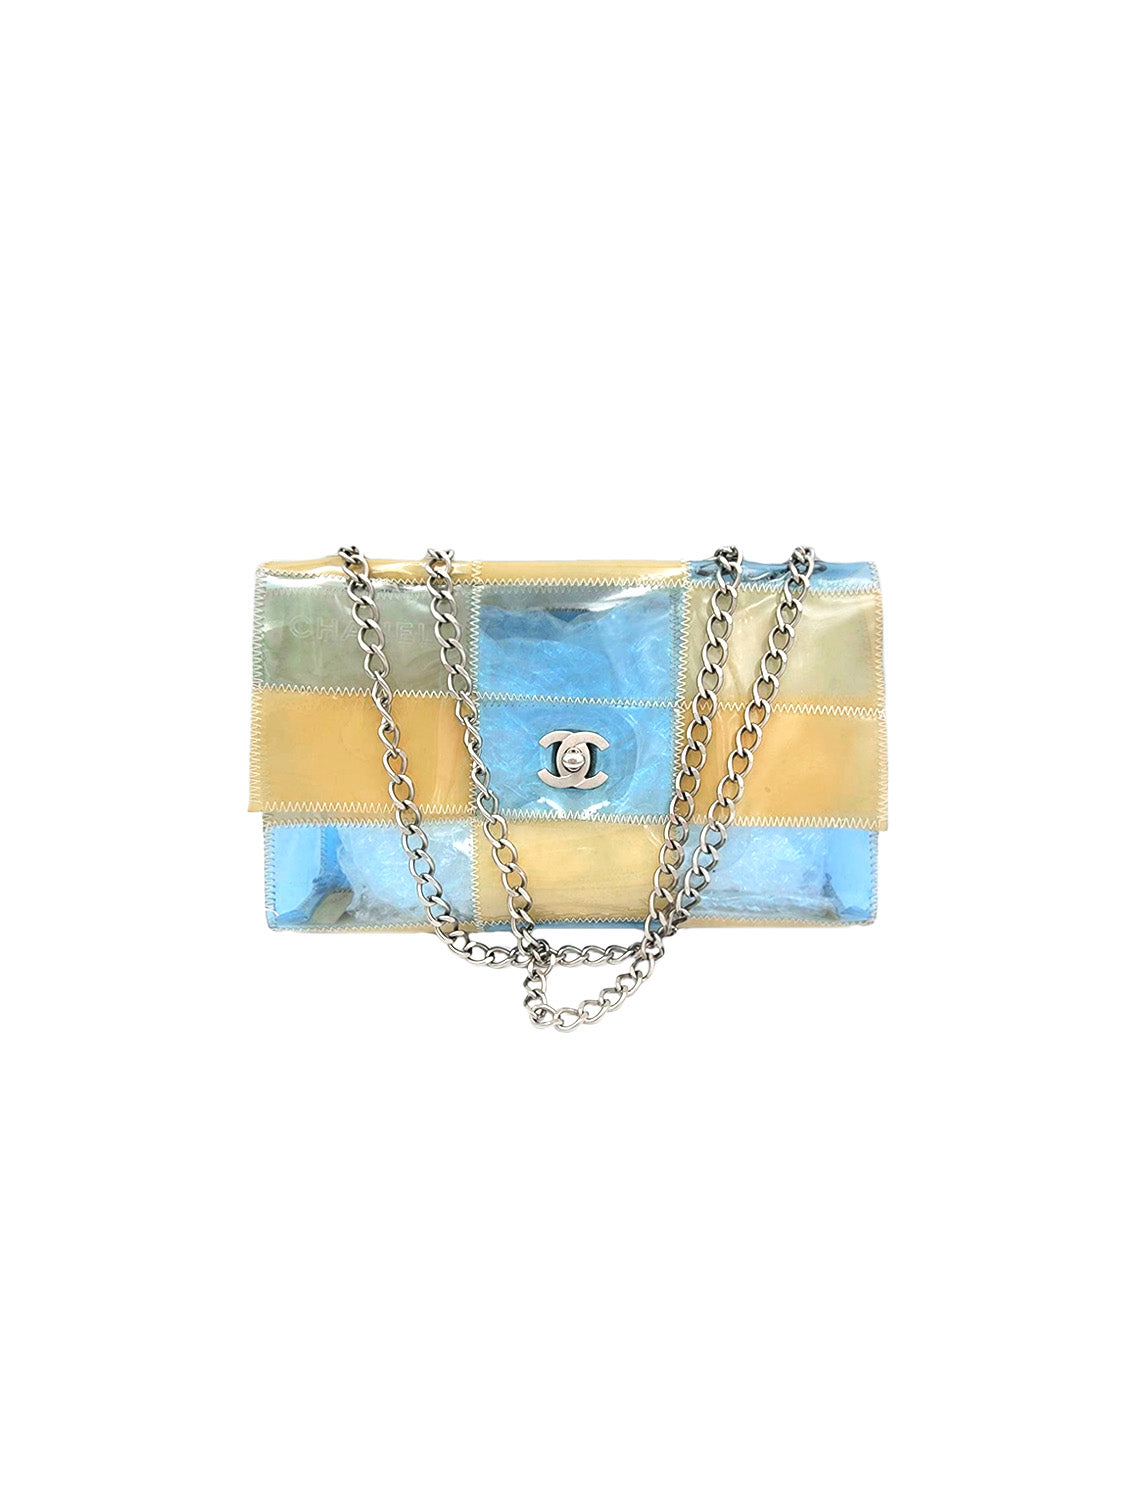 Chanel 2000s Beige and Blue Naked Patchwork PVC Flap